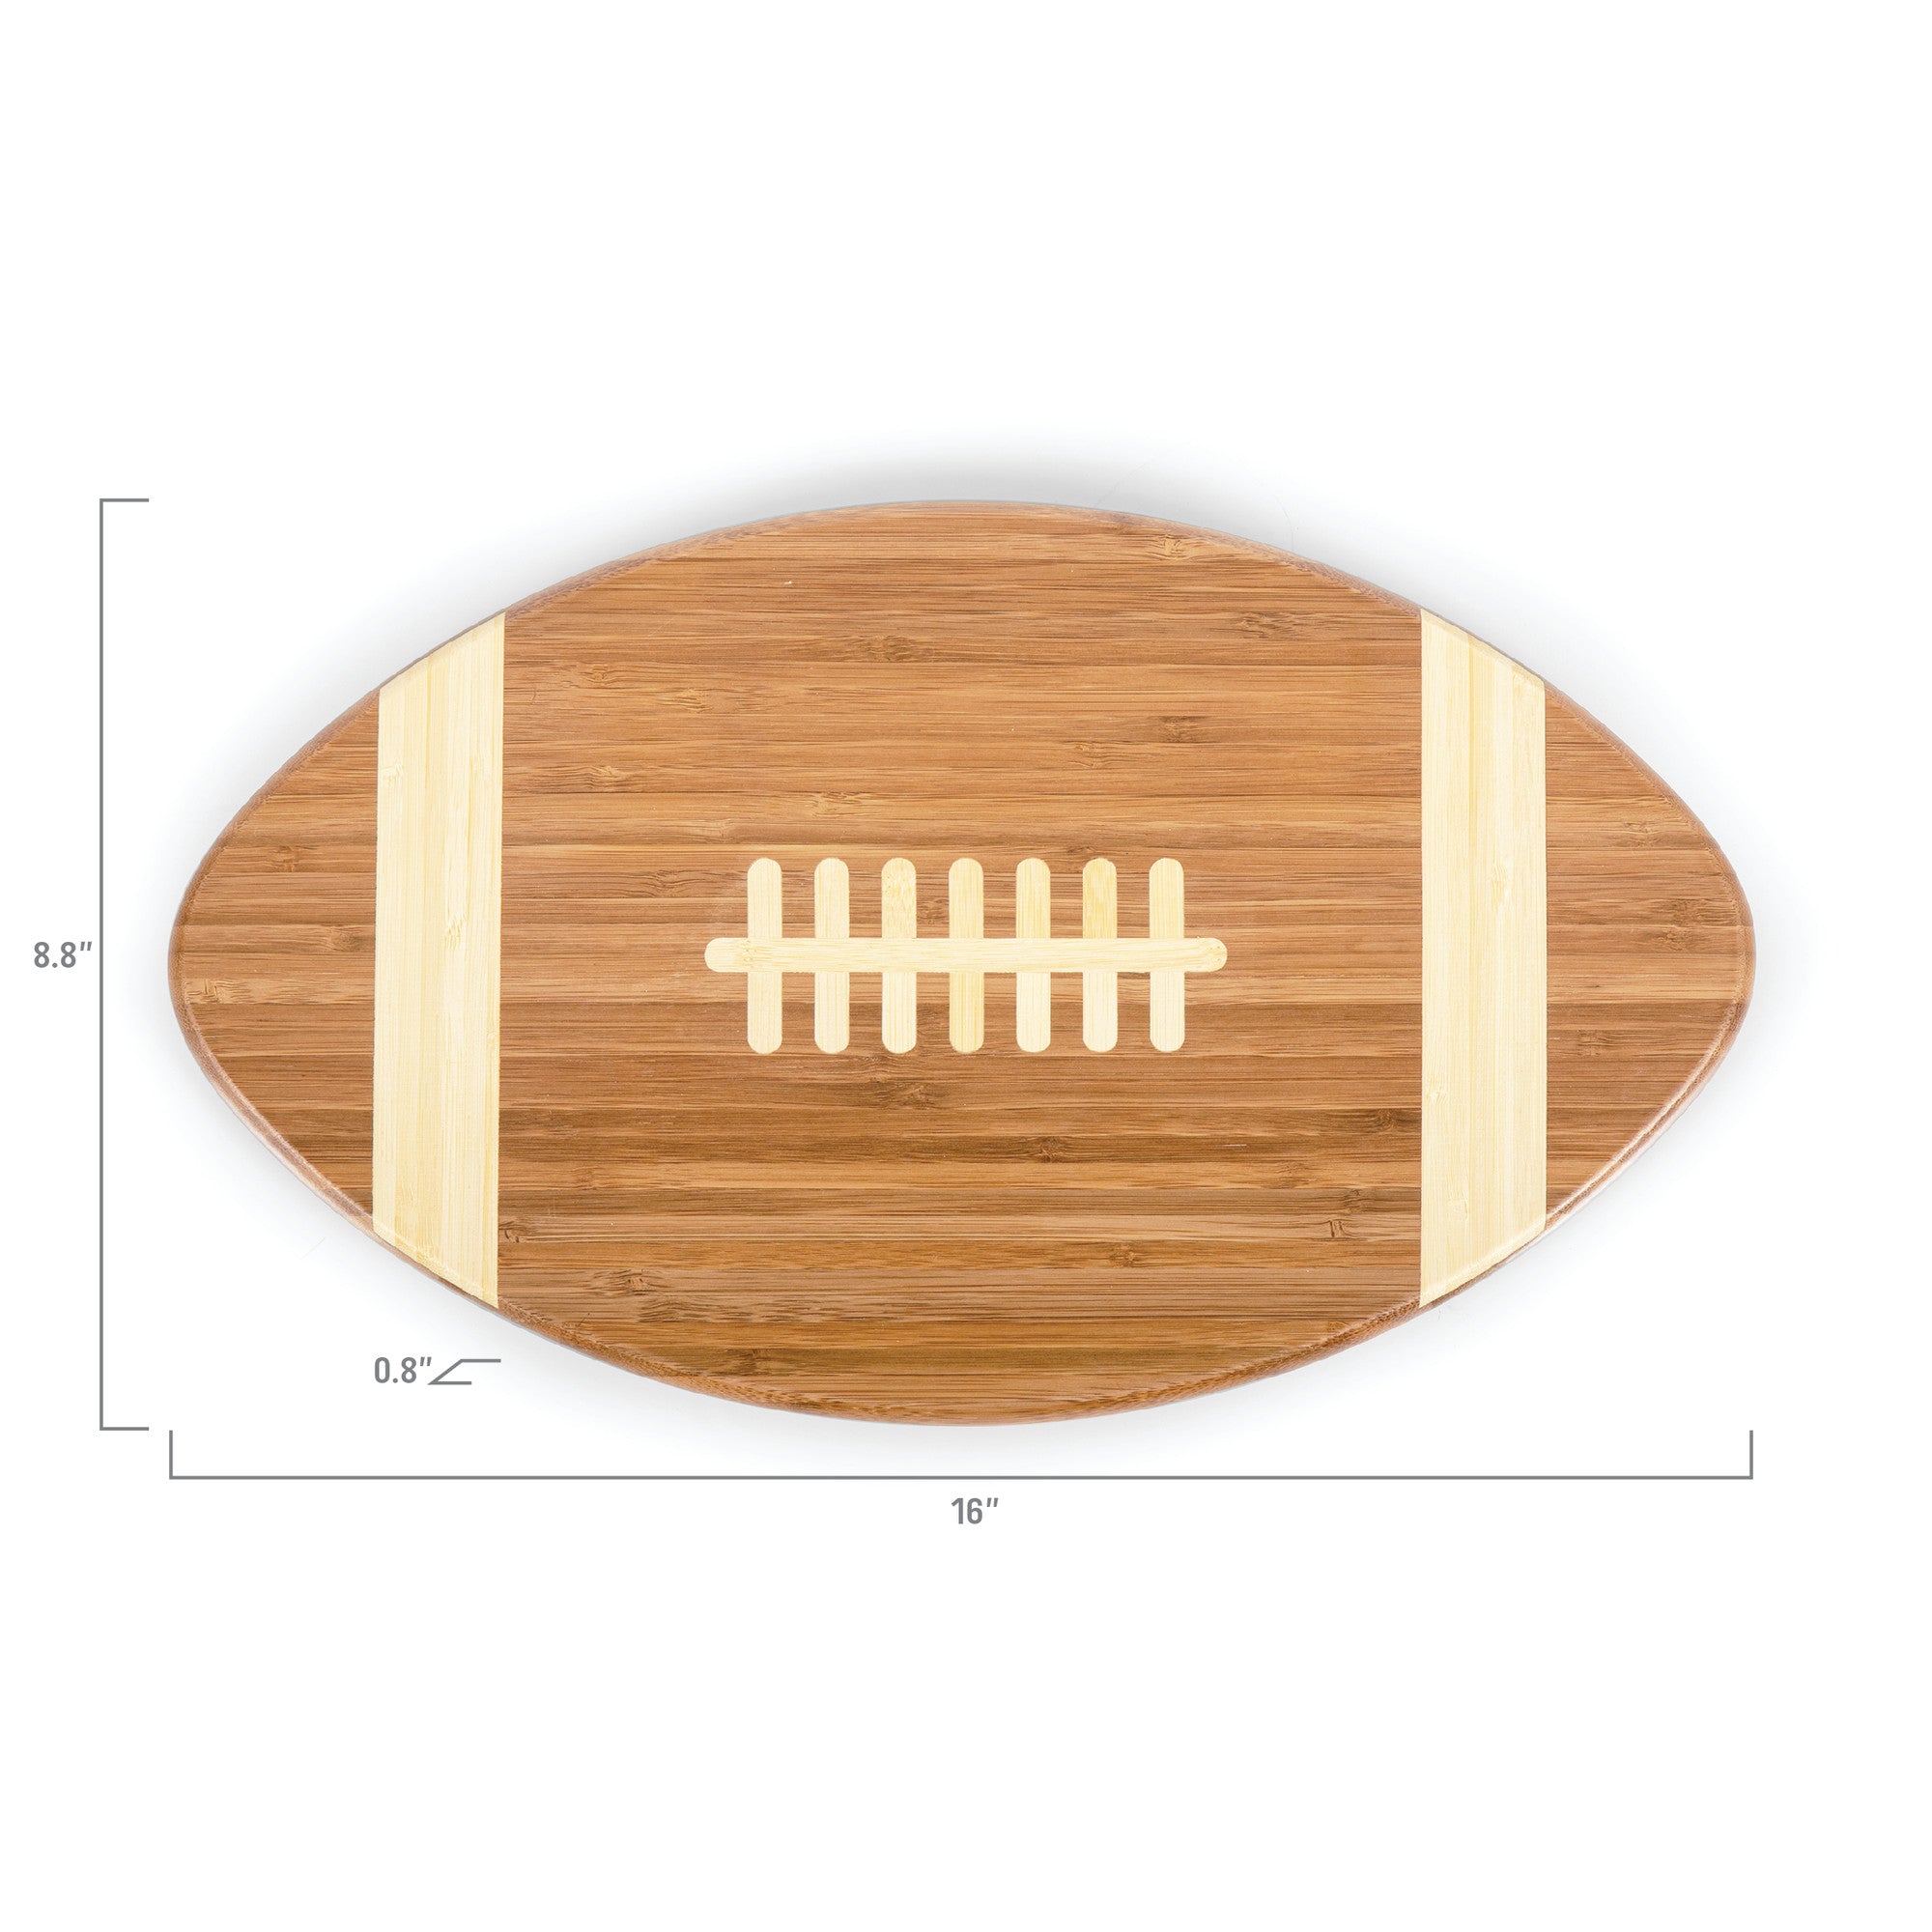 Wake Forest Demon Deacons - Touchdown! Football Cutting Board & Serving Tray